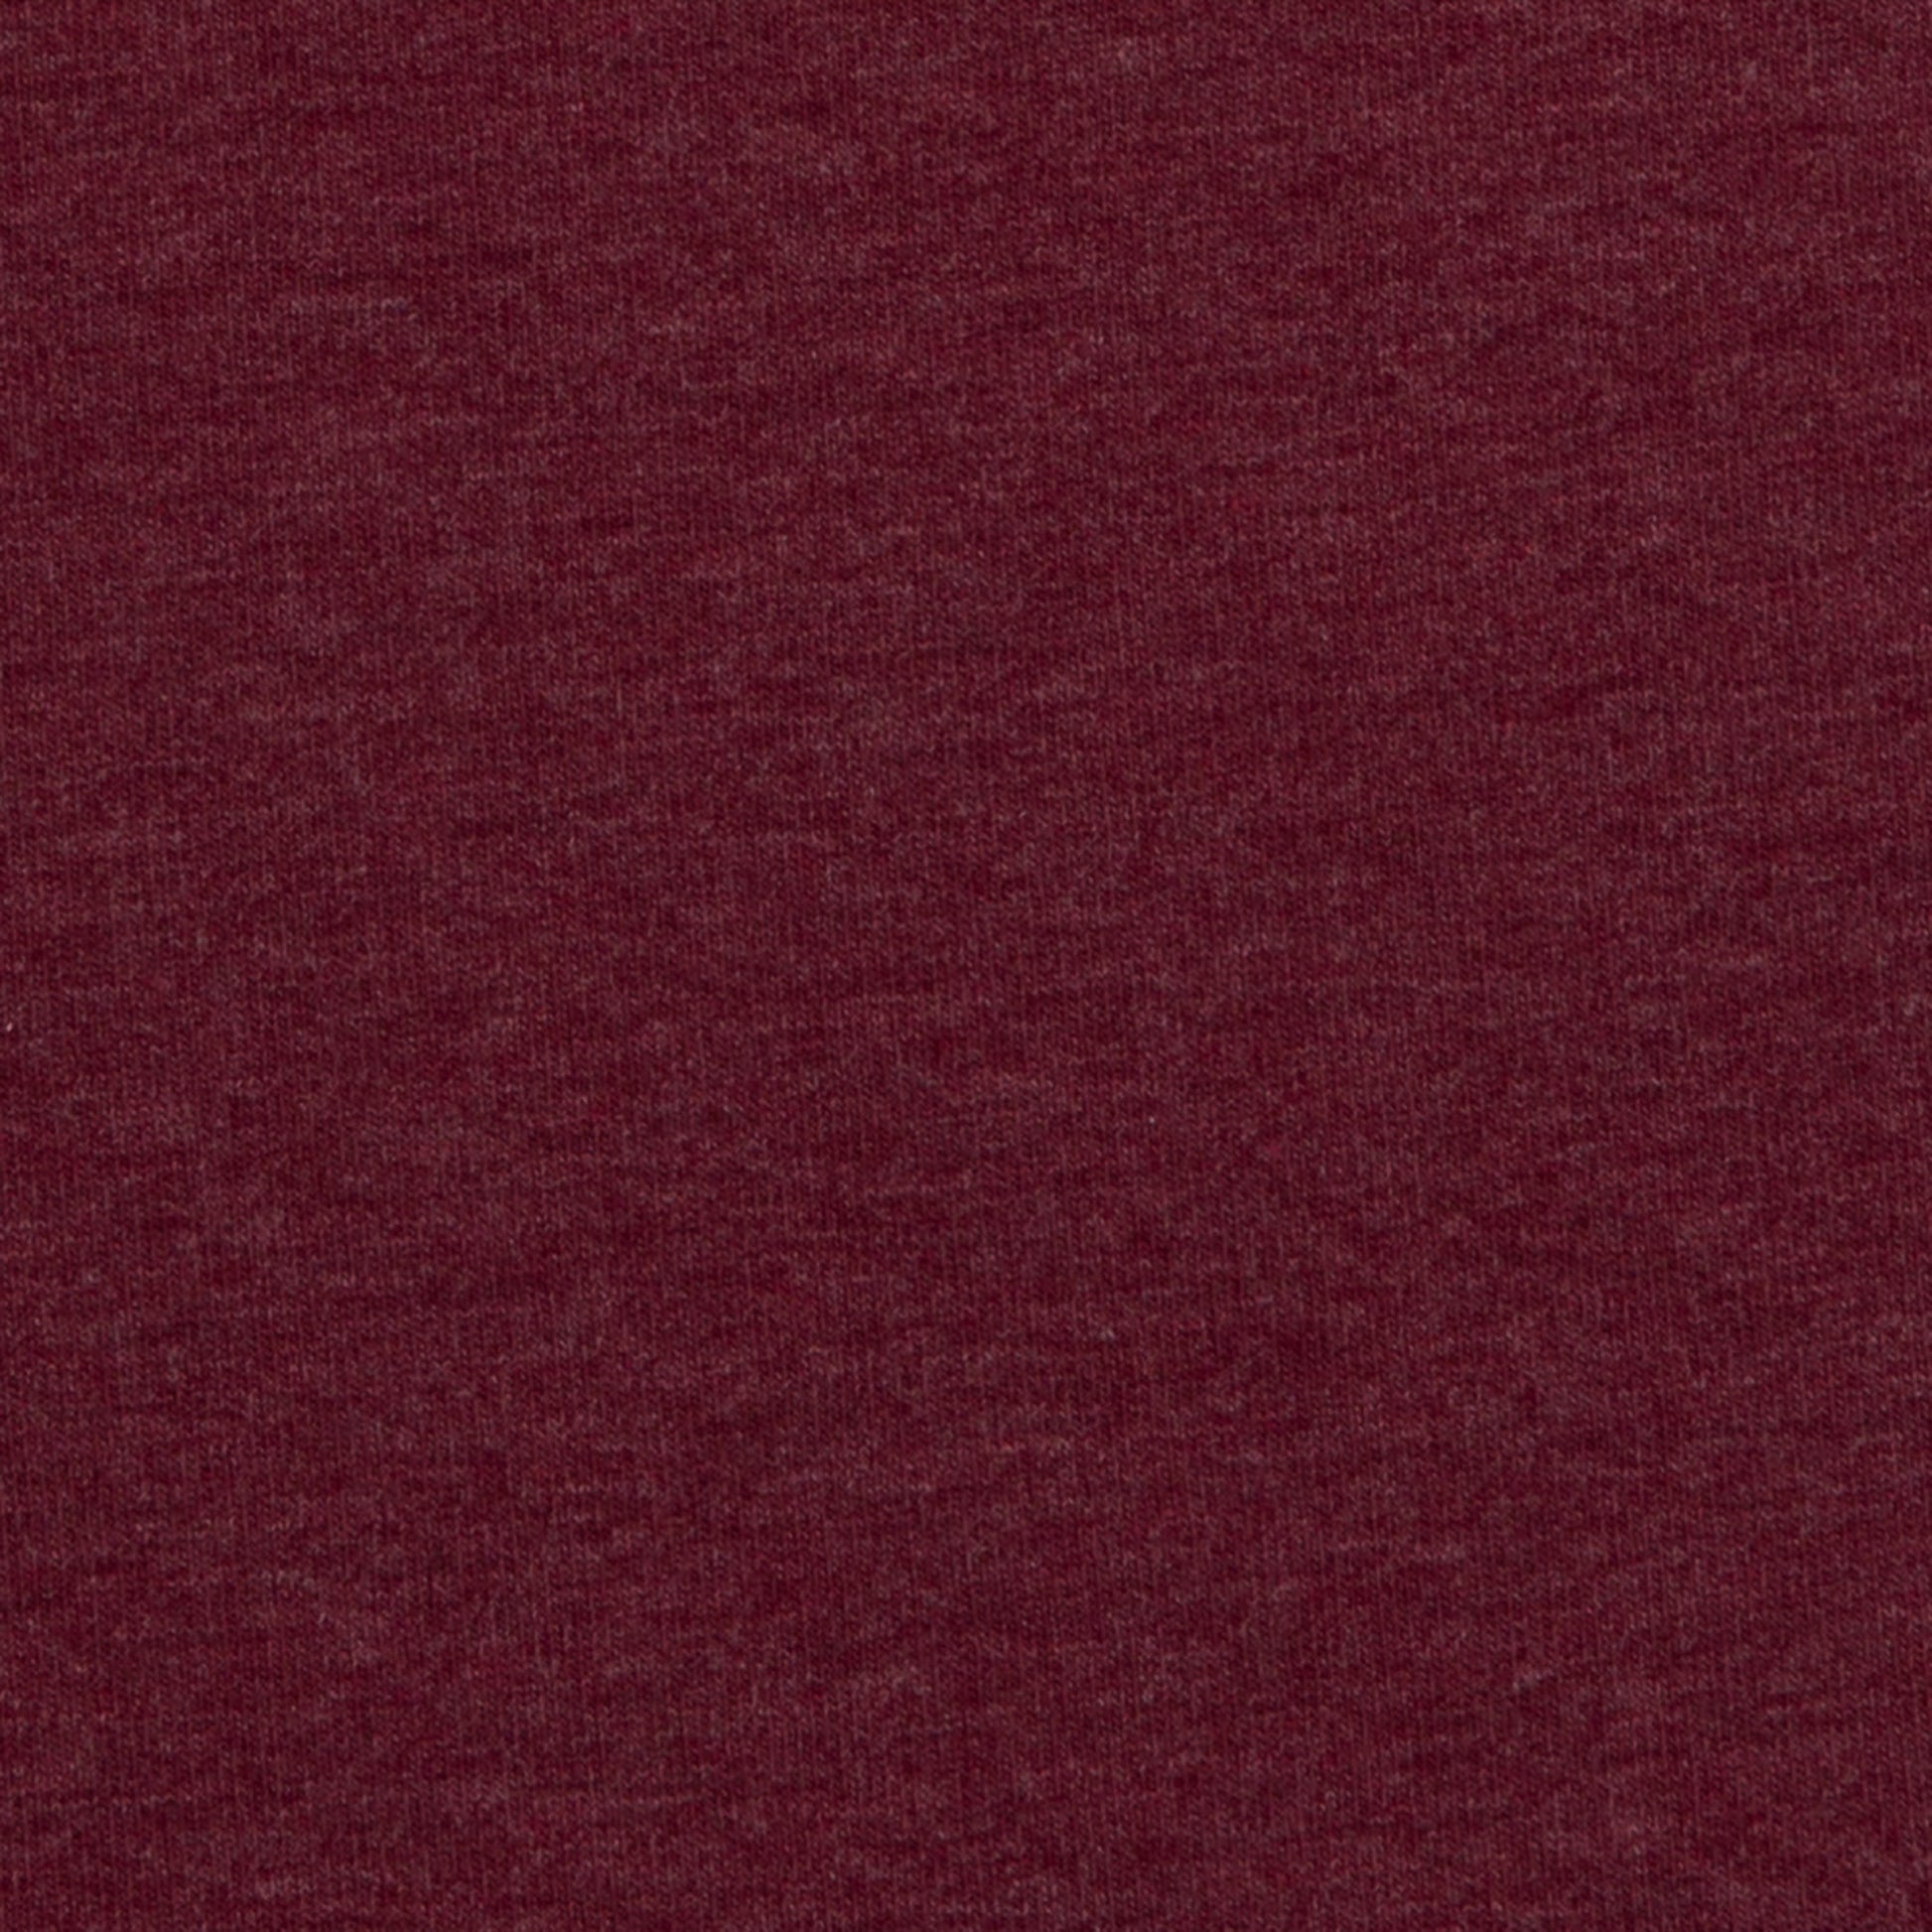 Swafing Melange - Bordeaux - Euro-ribbing - Jersey - French Terry - Fleeced French Terry - 1937 - Little Rhody Sewing Co.